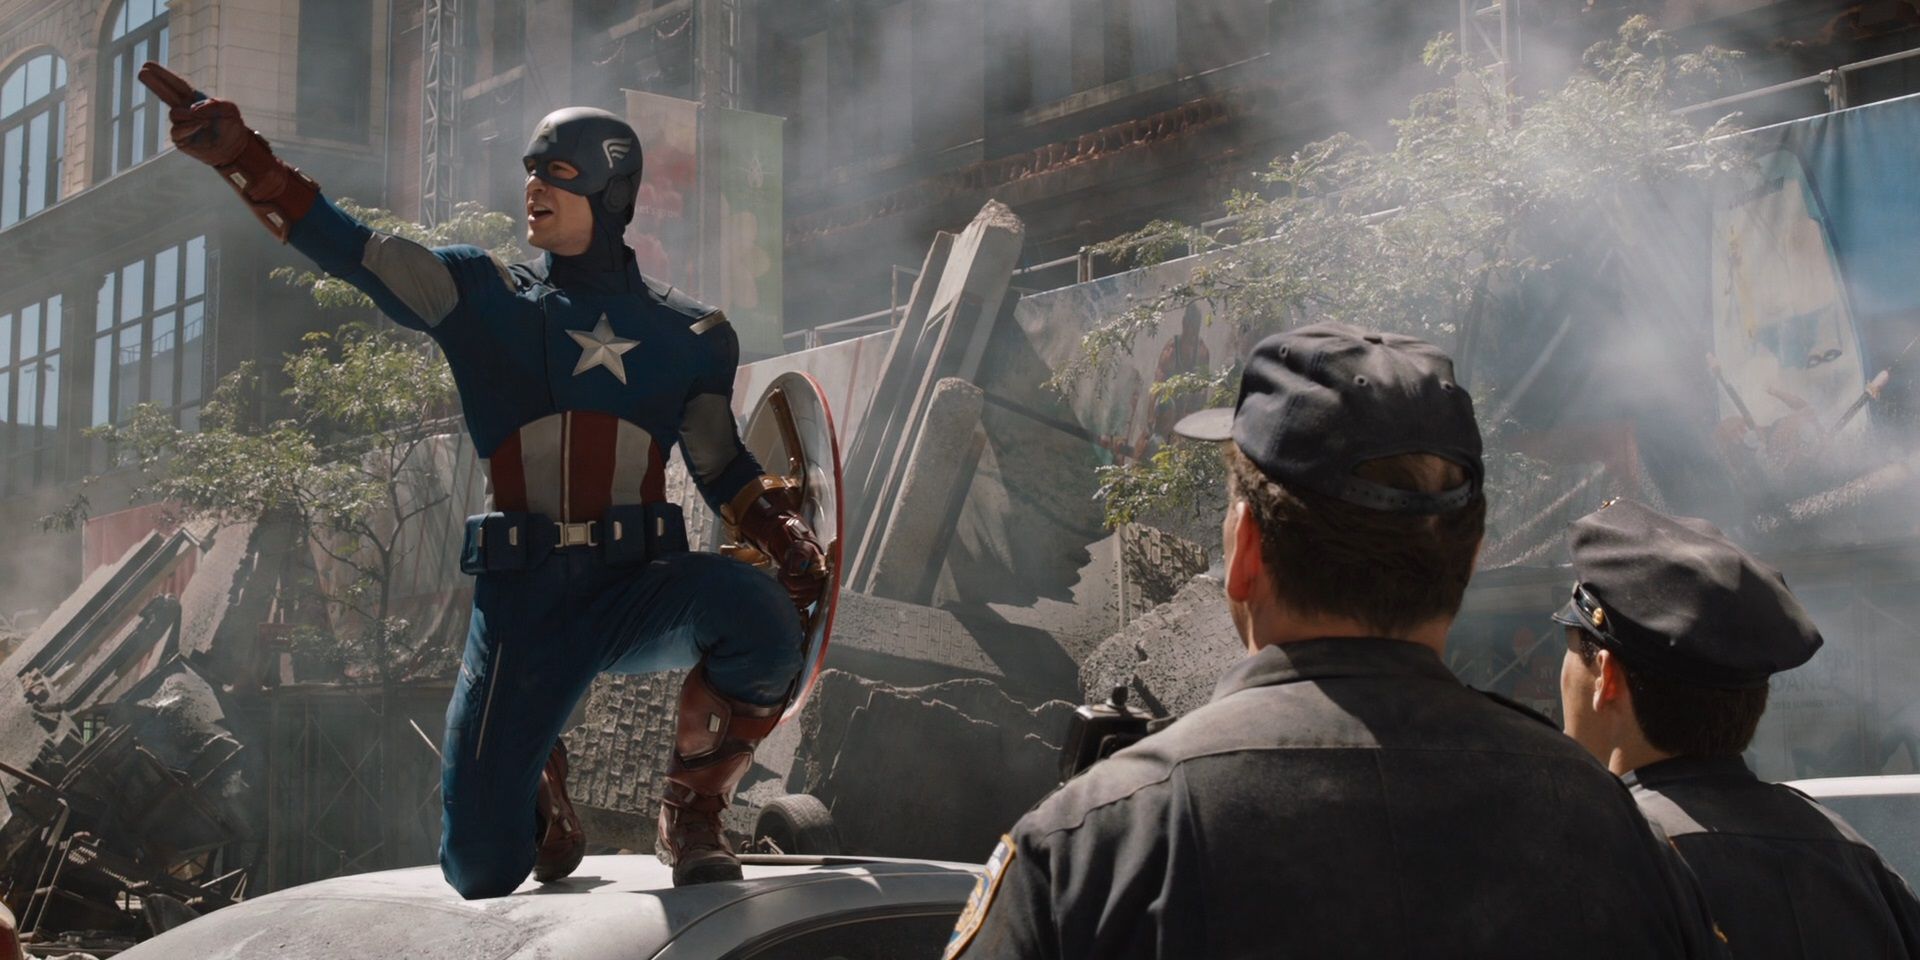 Captain America in the Battle of New York in The Avengers